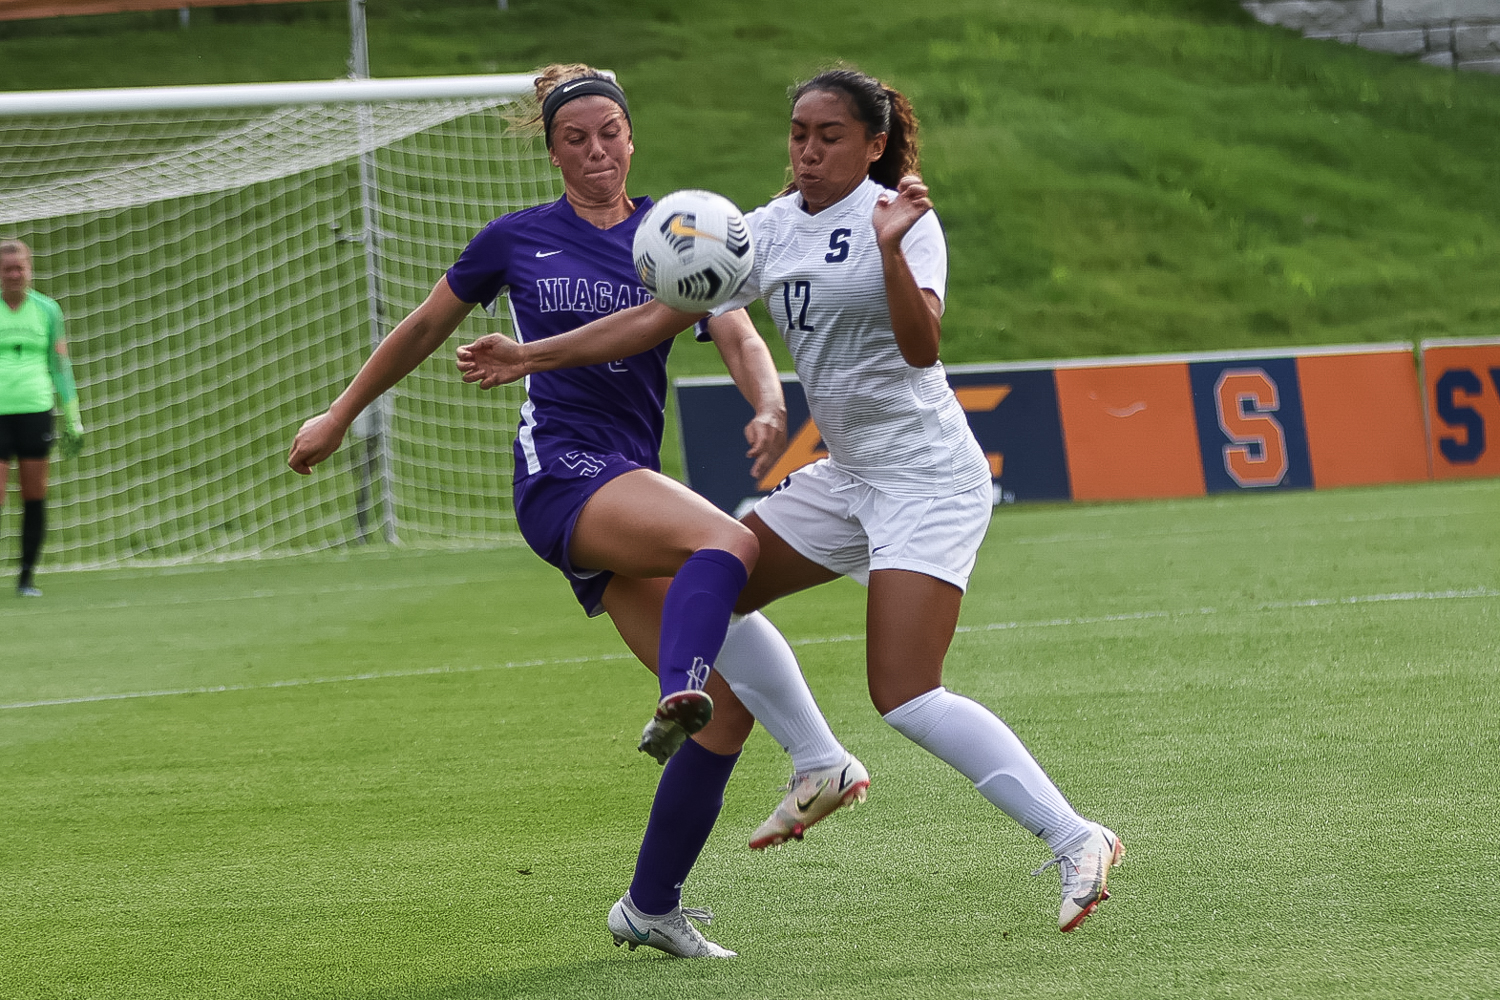 Syracuse’s Telly Vunipola (12) and Niagra’s Molly Tobin (5) brace for impact as the two battle for possession during an NCAA women’s soccer game, Thursday, at Syracuse Soccer Stadium. Niagara defeated Syracuse, 4-2.